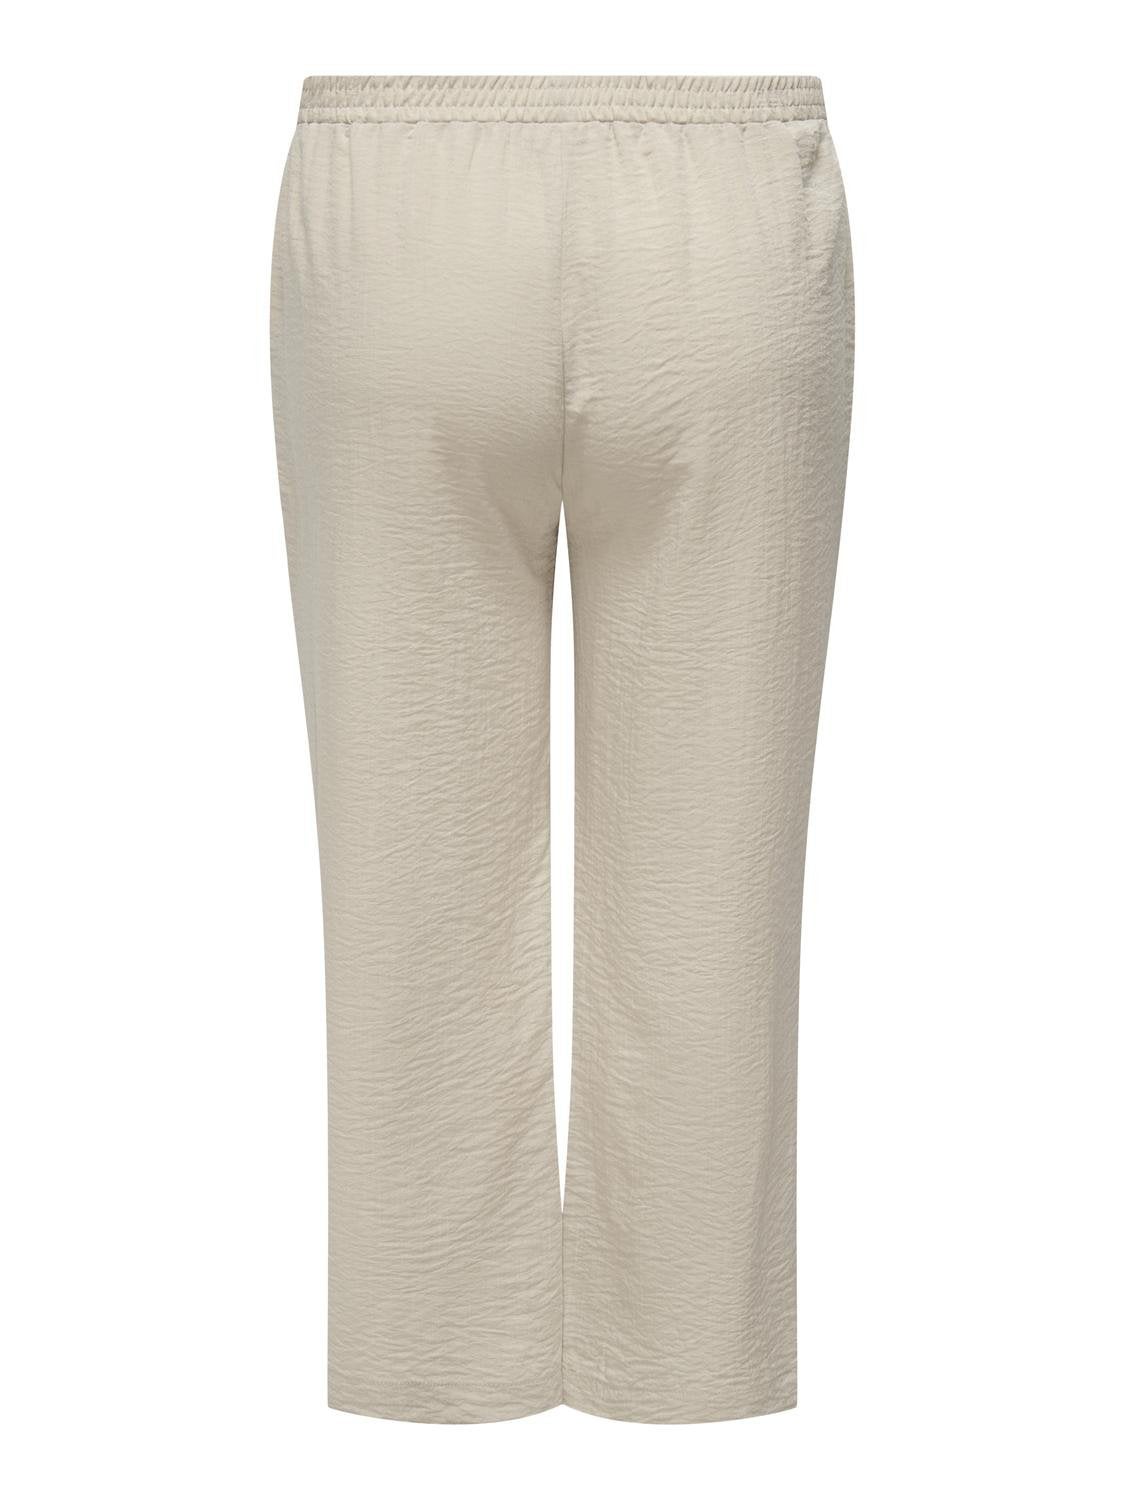 Buy Cream Trousers & Pants for Men by NETPLAY Online | Ajio.com